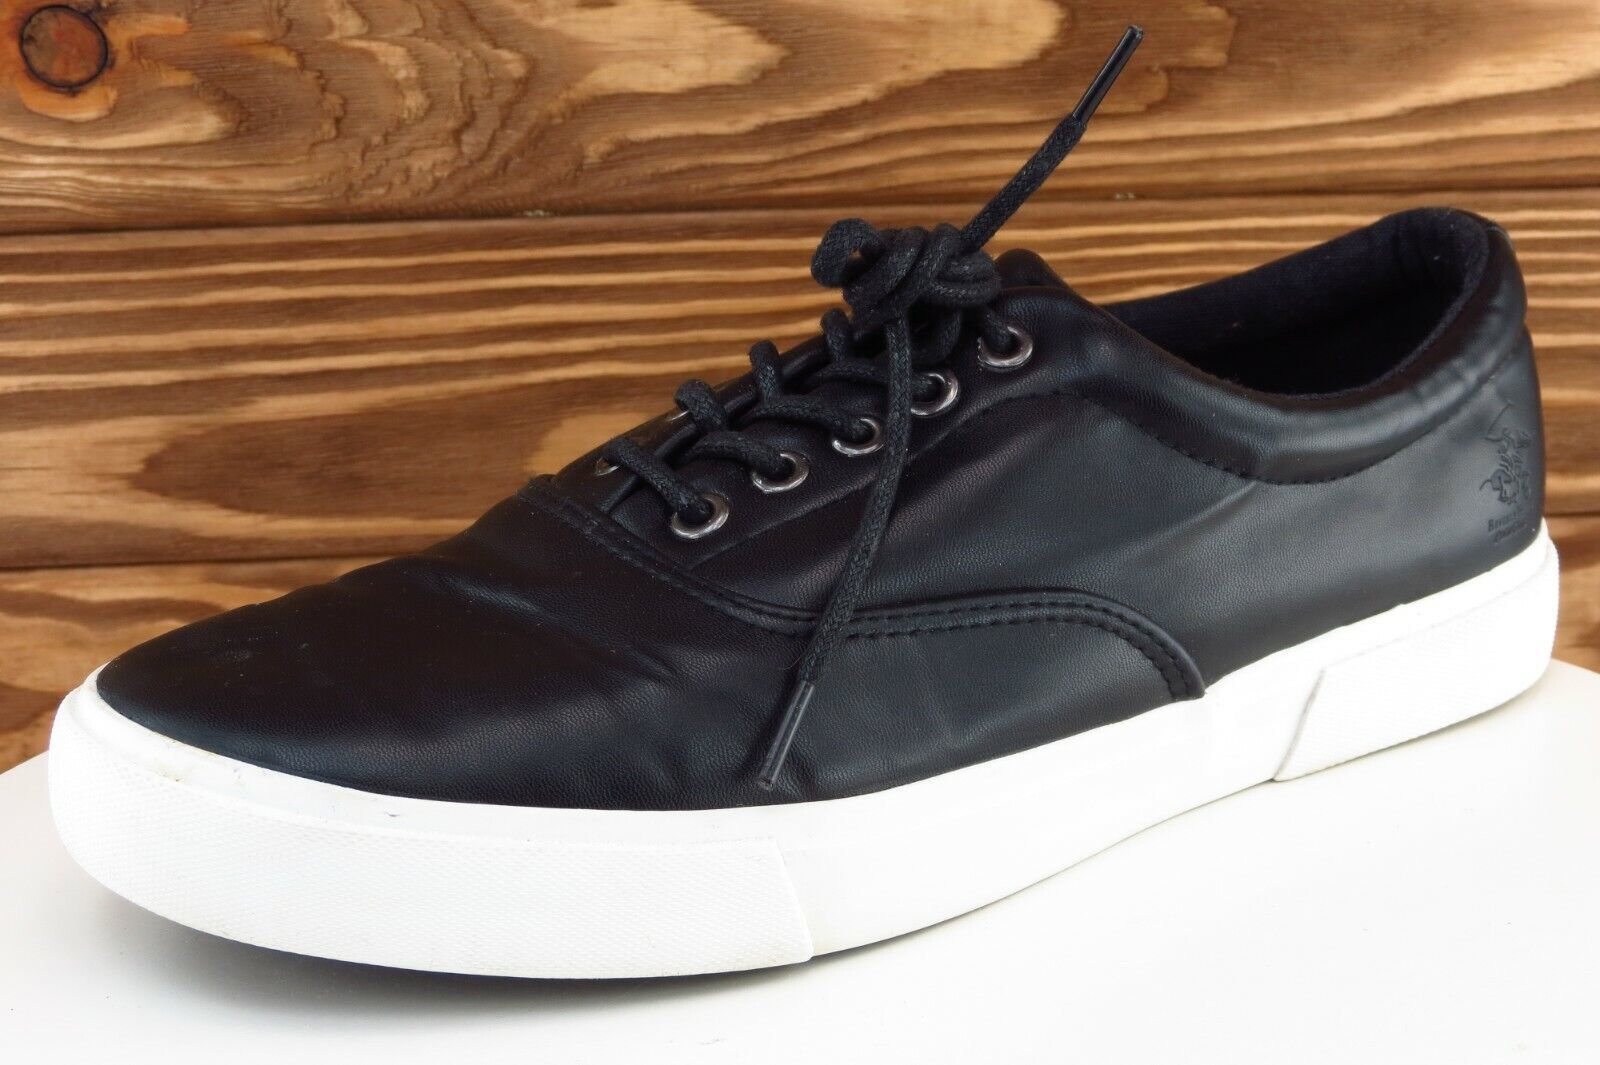 Beverly Hills Polo Club Shoes Size 10 M Black Fashion Sneakers Synthetic Men - $19.75